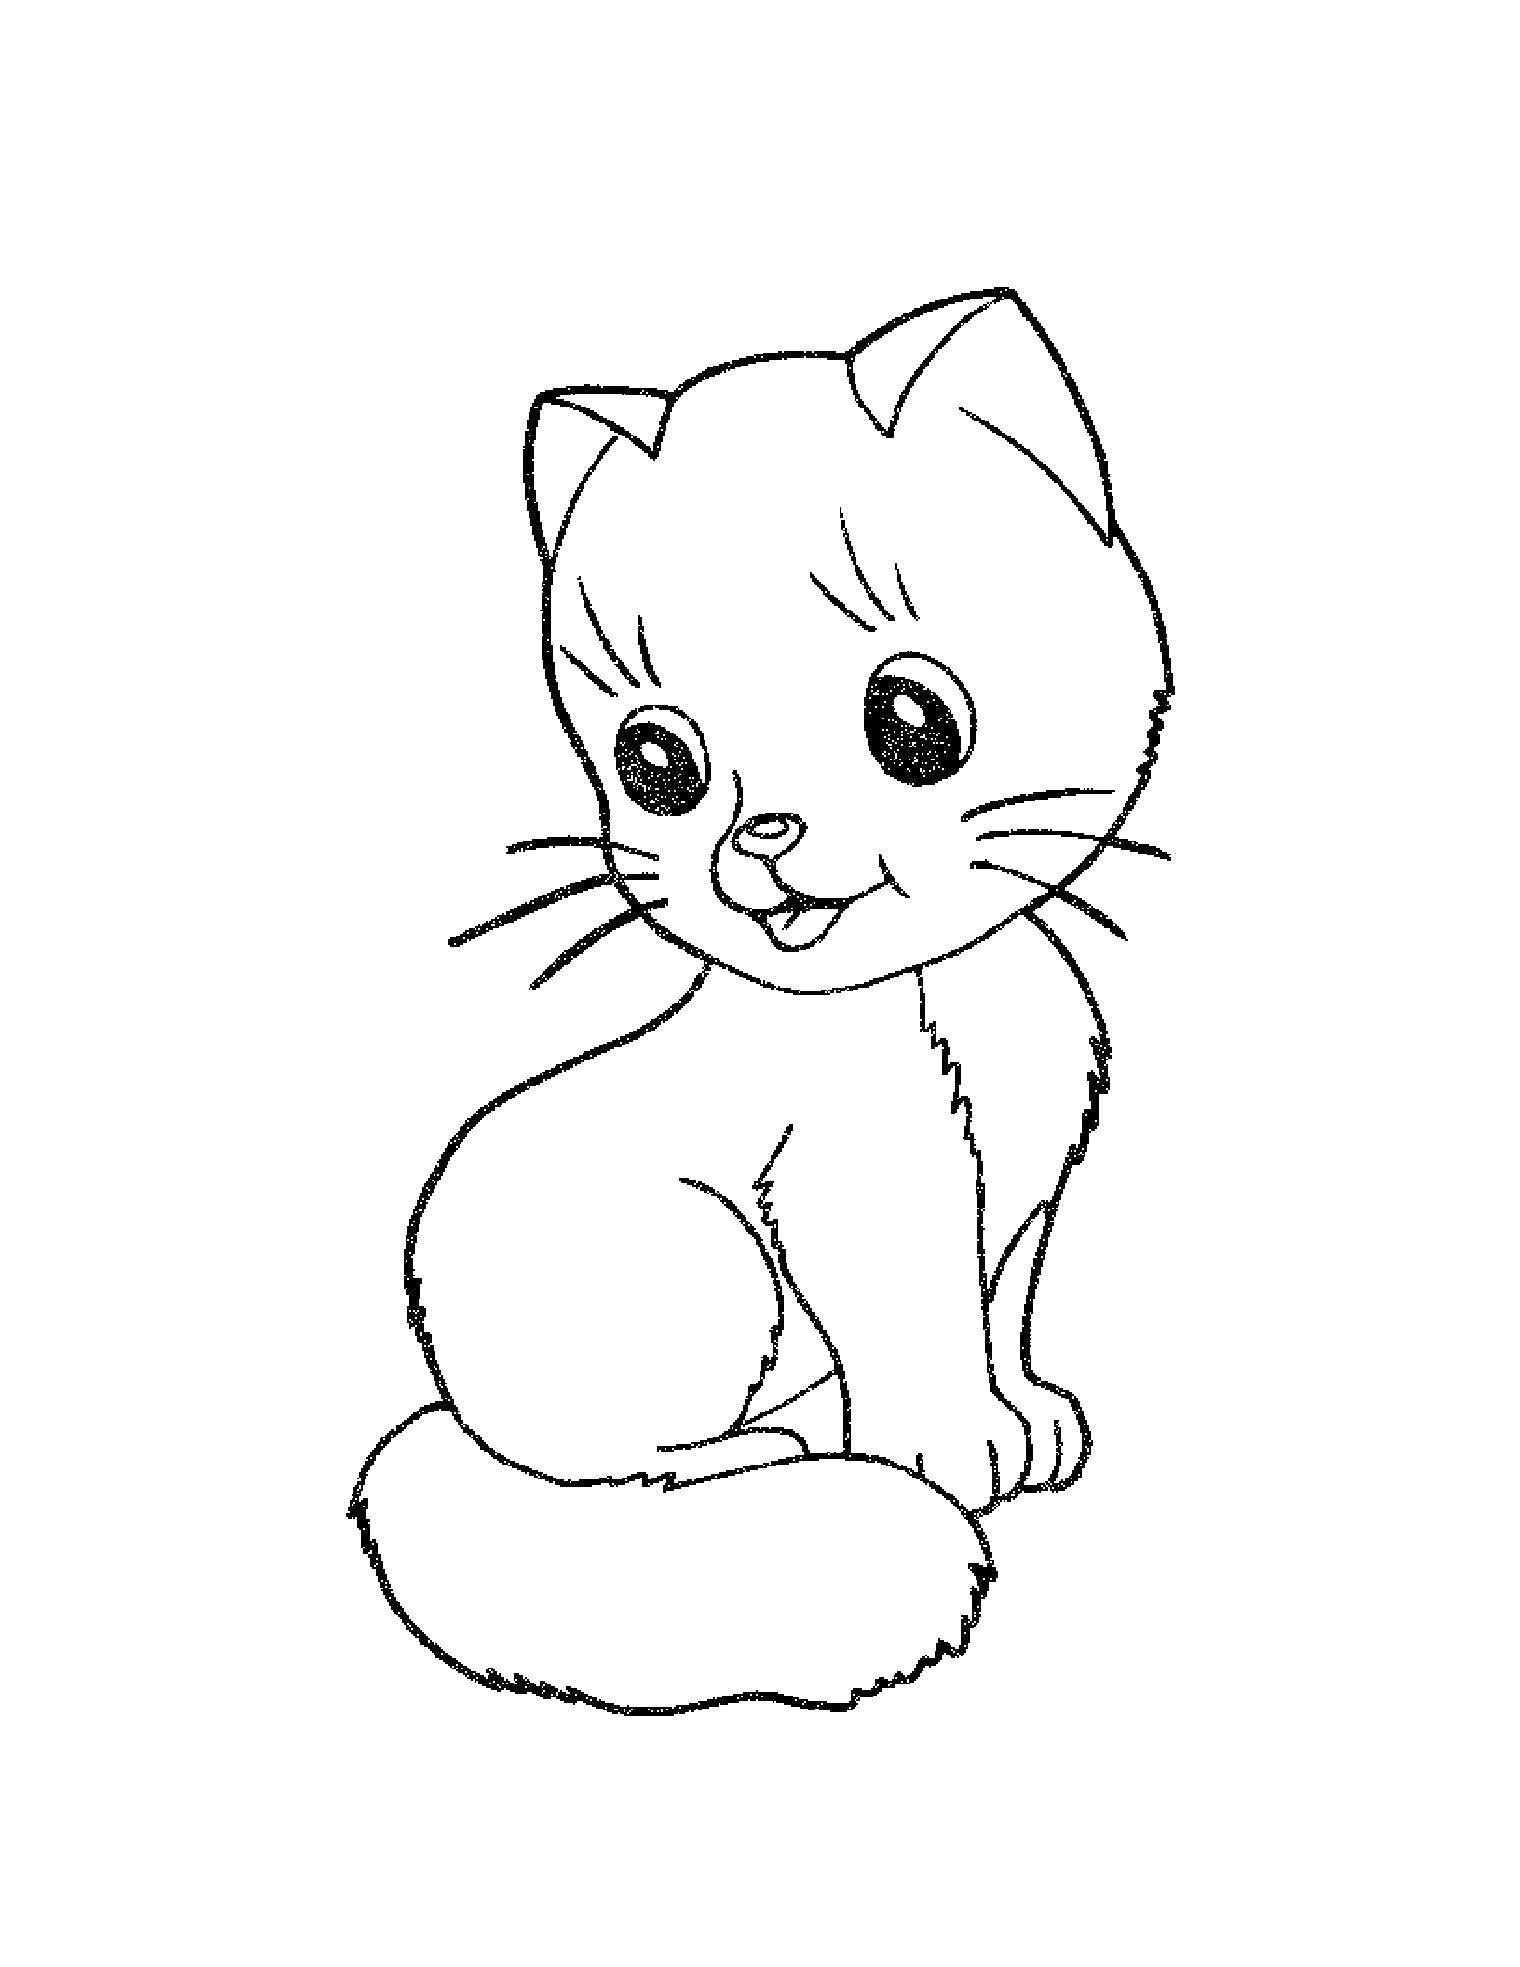 Coloring Little kitty. Category kittens. Tags:  kitty, tail, ears.